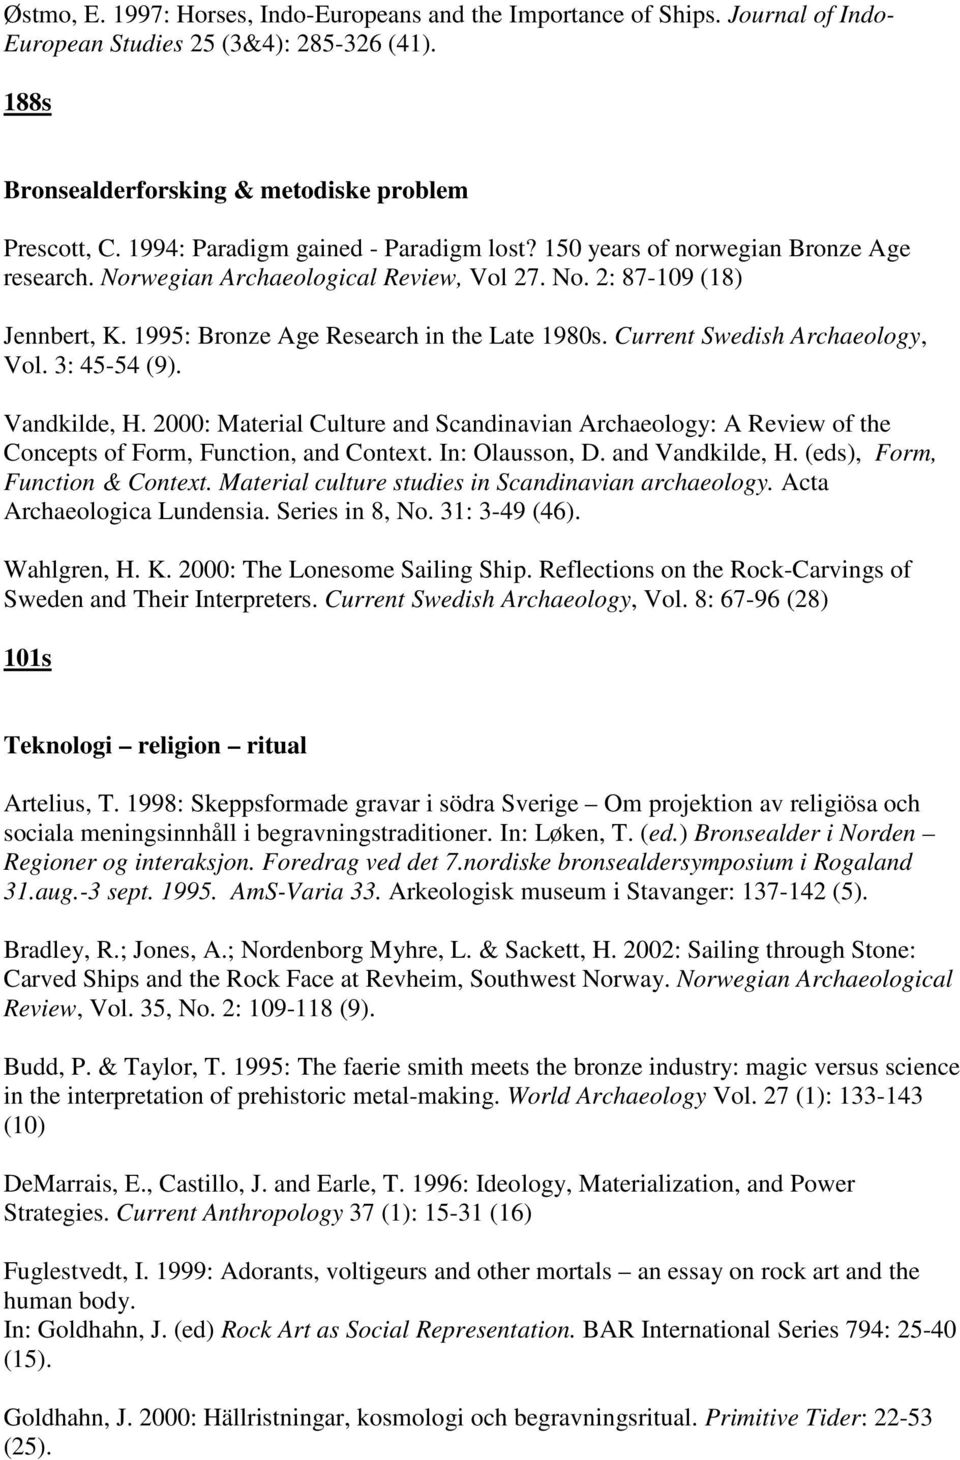 Current Swedish Archaeology, Vol. 3: 45-54 (9). Vandkilde, H. 2000: Material Culture and Scandinavian Archaeology: A Review of the Concepts of Form, Function, and Context. In: Olausson, D.